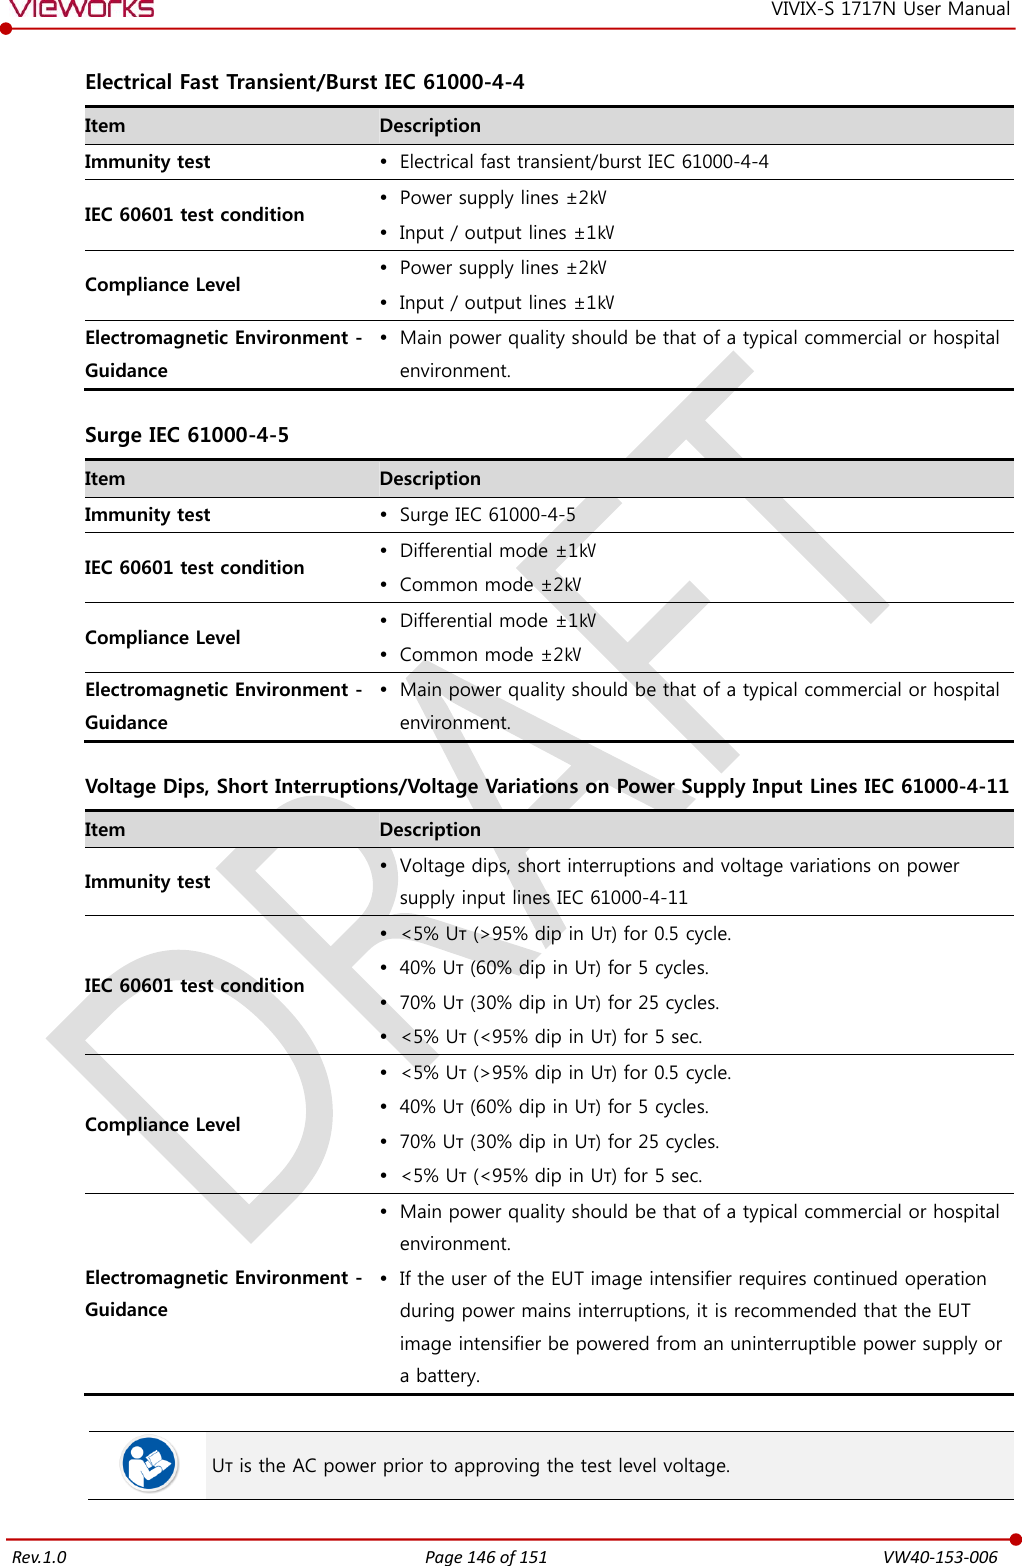   Rev.1.0 Page 146 of 151  VW40-153-006 VIVIX-S 1717N User Manual  Electrical Fast Transient/Burst IEC 61000-4-4 Item Description Immunity test  Electrical fast transient/burst IEC 61000-4-4 IEC 60601 test condition  Power supply lines ±2㎸  Input / output lines ±1㎸ Compliance Level  Power supply lines ±2㎸  Input / output lines ±1㎸ Electromagnetic Environment - Guidance  Main power quality should be that of a typical commercial or hospital environment.  Surge IEC 61000-4-5 Item Description Immunity test  Surge IEC 61000-4-5 IEC 60601 test condition  Differential mode ±1㎸  Common mode ±2㎸ Compliance Level  Differential mode ±1㎸  Common mode ±2㎸ Electromagnetic Environment - Guidance  Main power quality should be that of a typical commercial or hospital environment.  Voltage Dips, Short Interruptions/Voltage Variations on Power Supply Input Lines IEC 61000-4-11 Item Description Immunity test  Voltage dips, short interruptions and voltage variations on power supply input lines IEC 61000-4-11 IEC 60601 test condition  &lt;5% Uт (&gt;95% dip in Uт) for 0.5 cycle.  40% Uт (60% dip in Uт) for 5 cycles.  70% Uт (30% dip in Uт) for 25 cycles.  &lt;5% Uт (&lt;95% dip in Uт) for 5 sec. Compliance Level  &lt;5% Uт (&gt;95% dip in Uт) for 0.5 cycle.  40% Uт (60% dip in Uт) for 5 cycles.  70% Uт (30% dip in Uт) for 25 cycles.  &lt;5% Uт (&lt;95% dip in Uт) for 5 sec. Electromagnetic Environment - Guidance  Main power quality should be that of a typical commercial or hospital environment.  If the user of the EUT image intensifier requires continued operation during power mains interruptions, it is recommended that the EUT image intensifier be powered from an uninterruptible power supply or a battery.   Uт is the AC power prior to approving the test level voltage. 